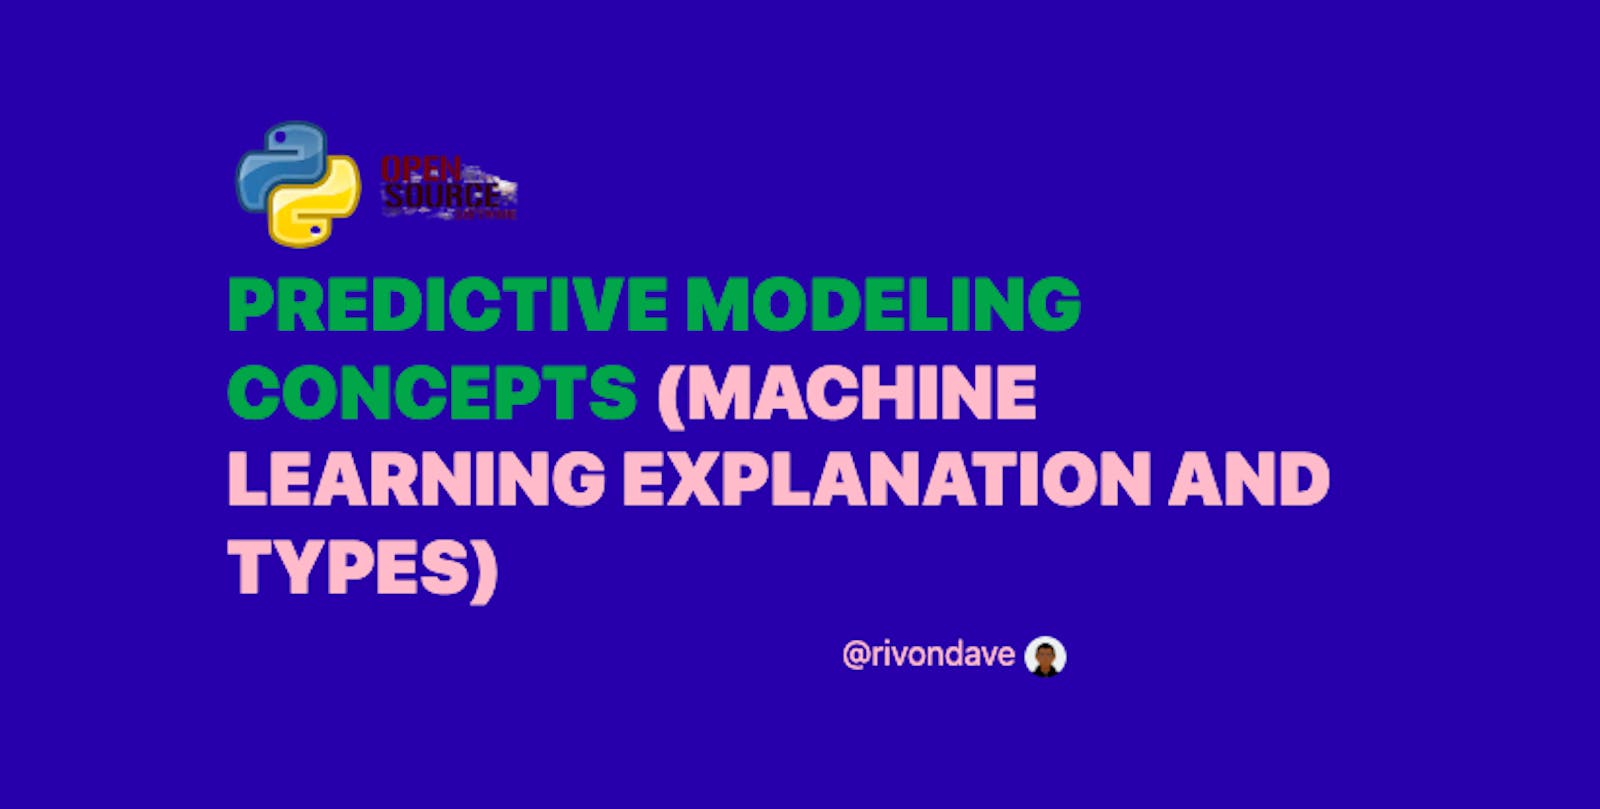 Predictive Modeling Concepts (Machine Learning Explanation and Types)